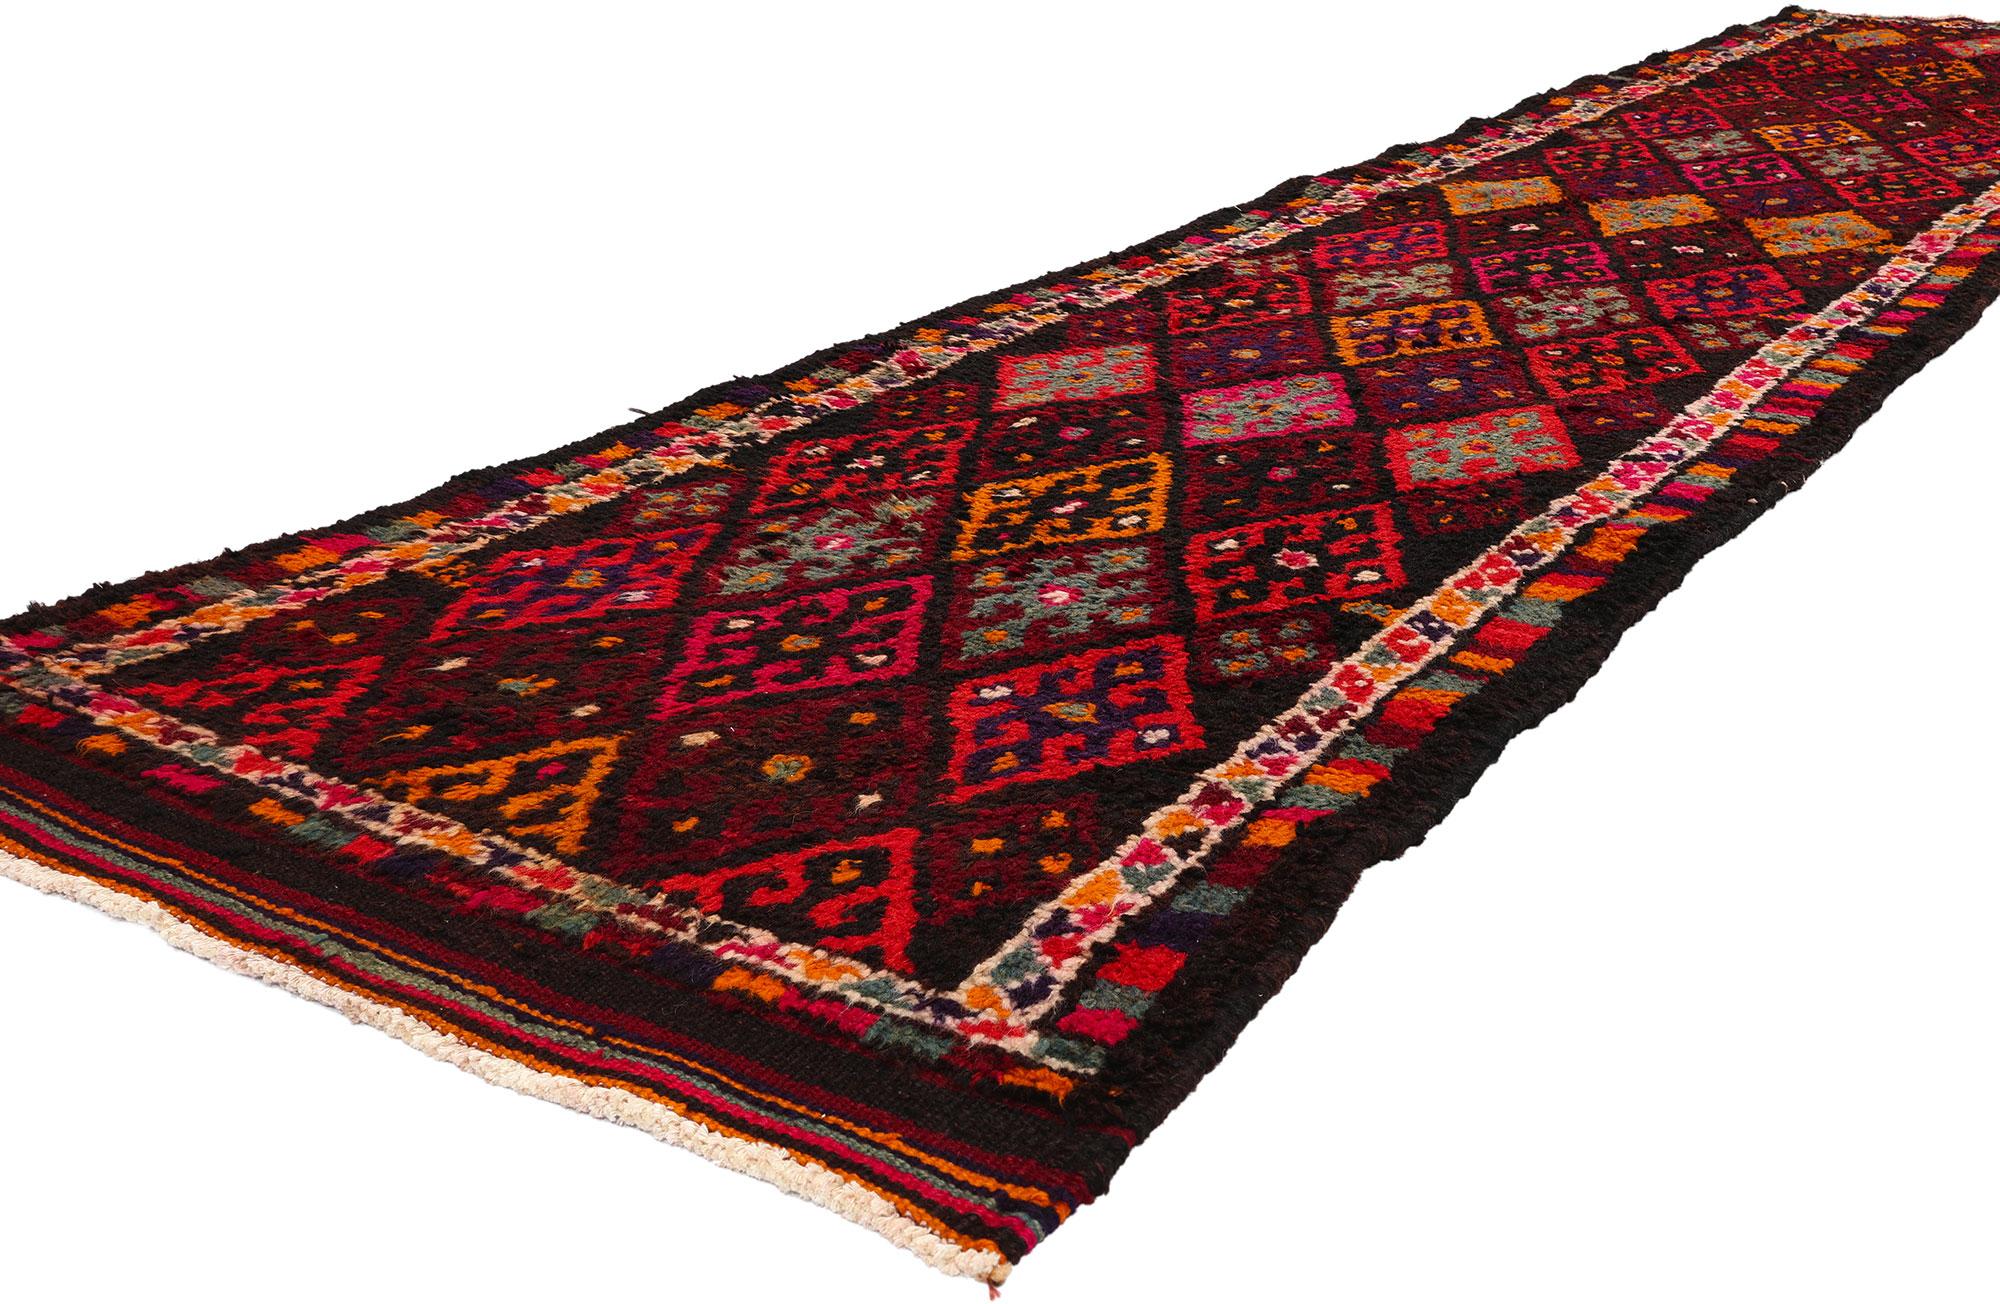 53891 Vintage Kurdish Tribal Rug Runner, 02'10 x 13'00. Handcrafted by Kurdish Herki tribes primarily in eastern Turkey's Hakkari province, Kurdish rugs stand out for their vibrant colors and intricate geometric patterns. Meticulously woven using